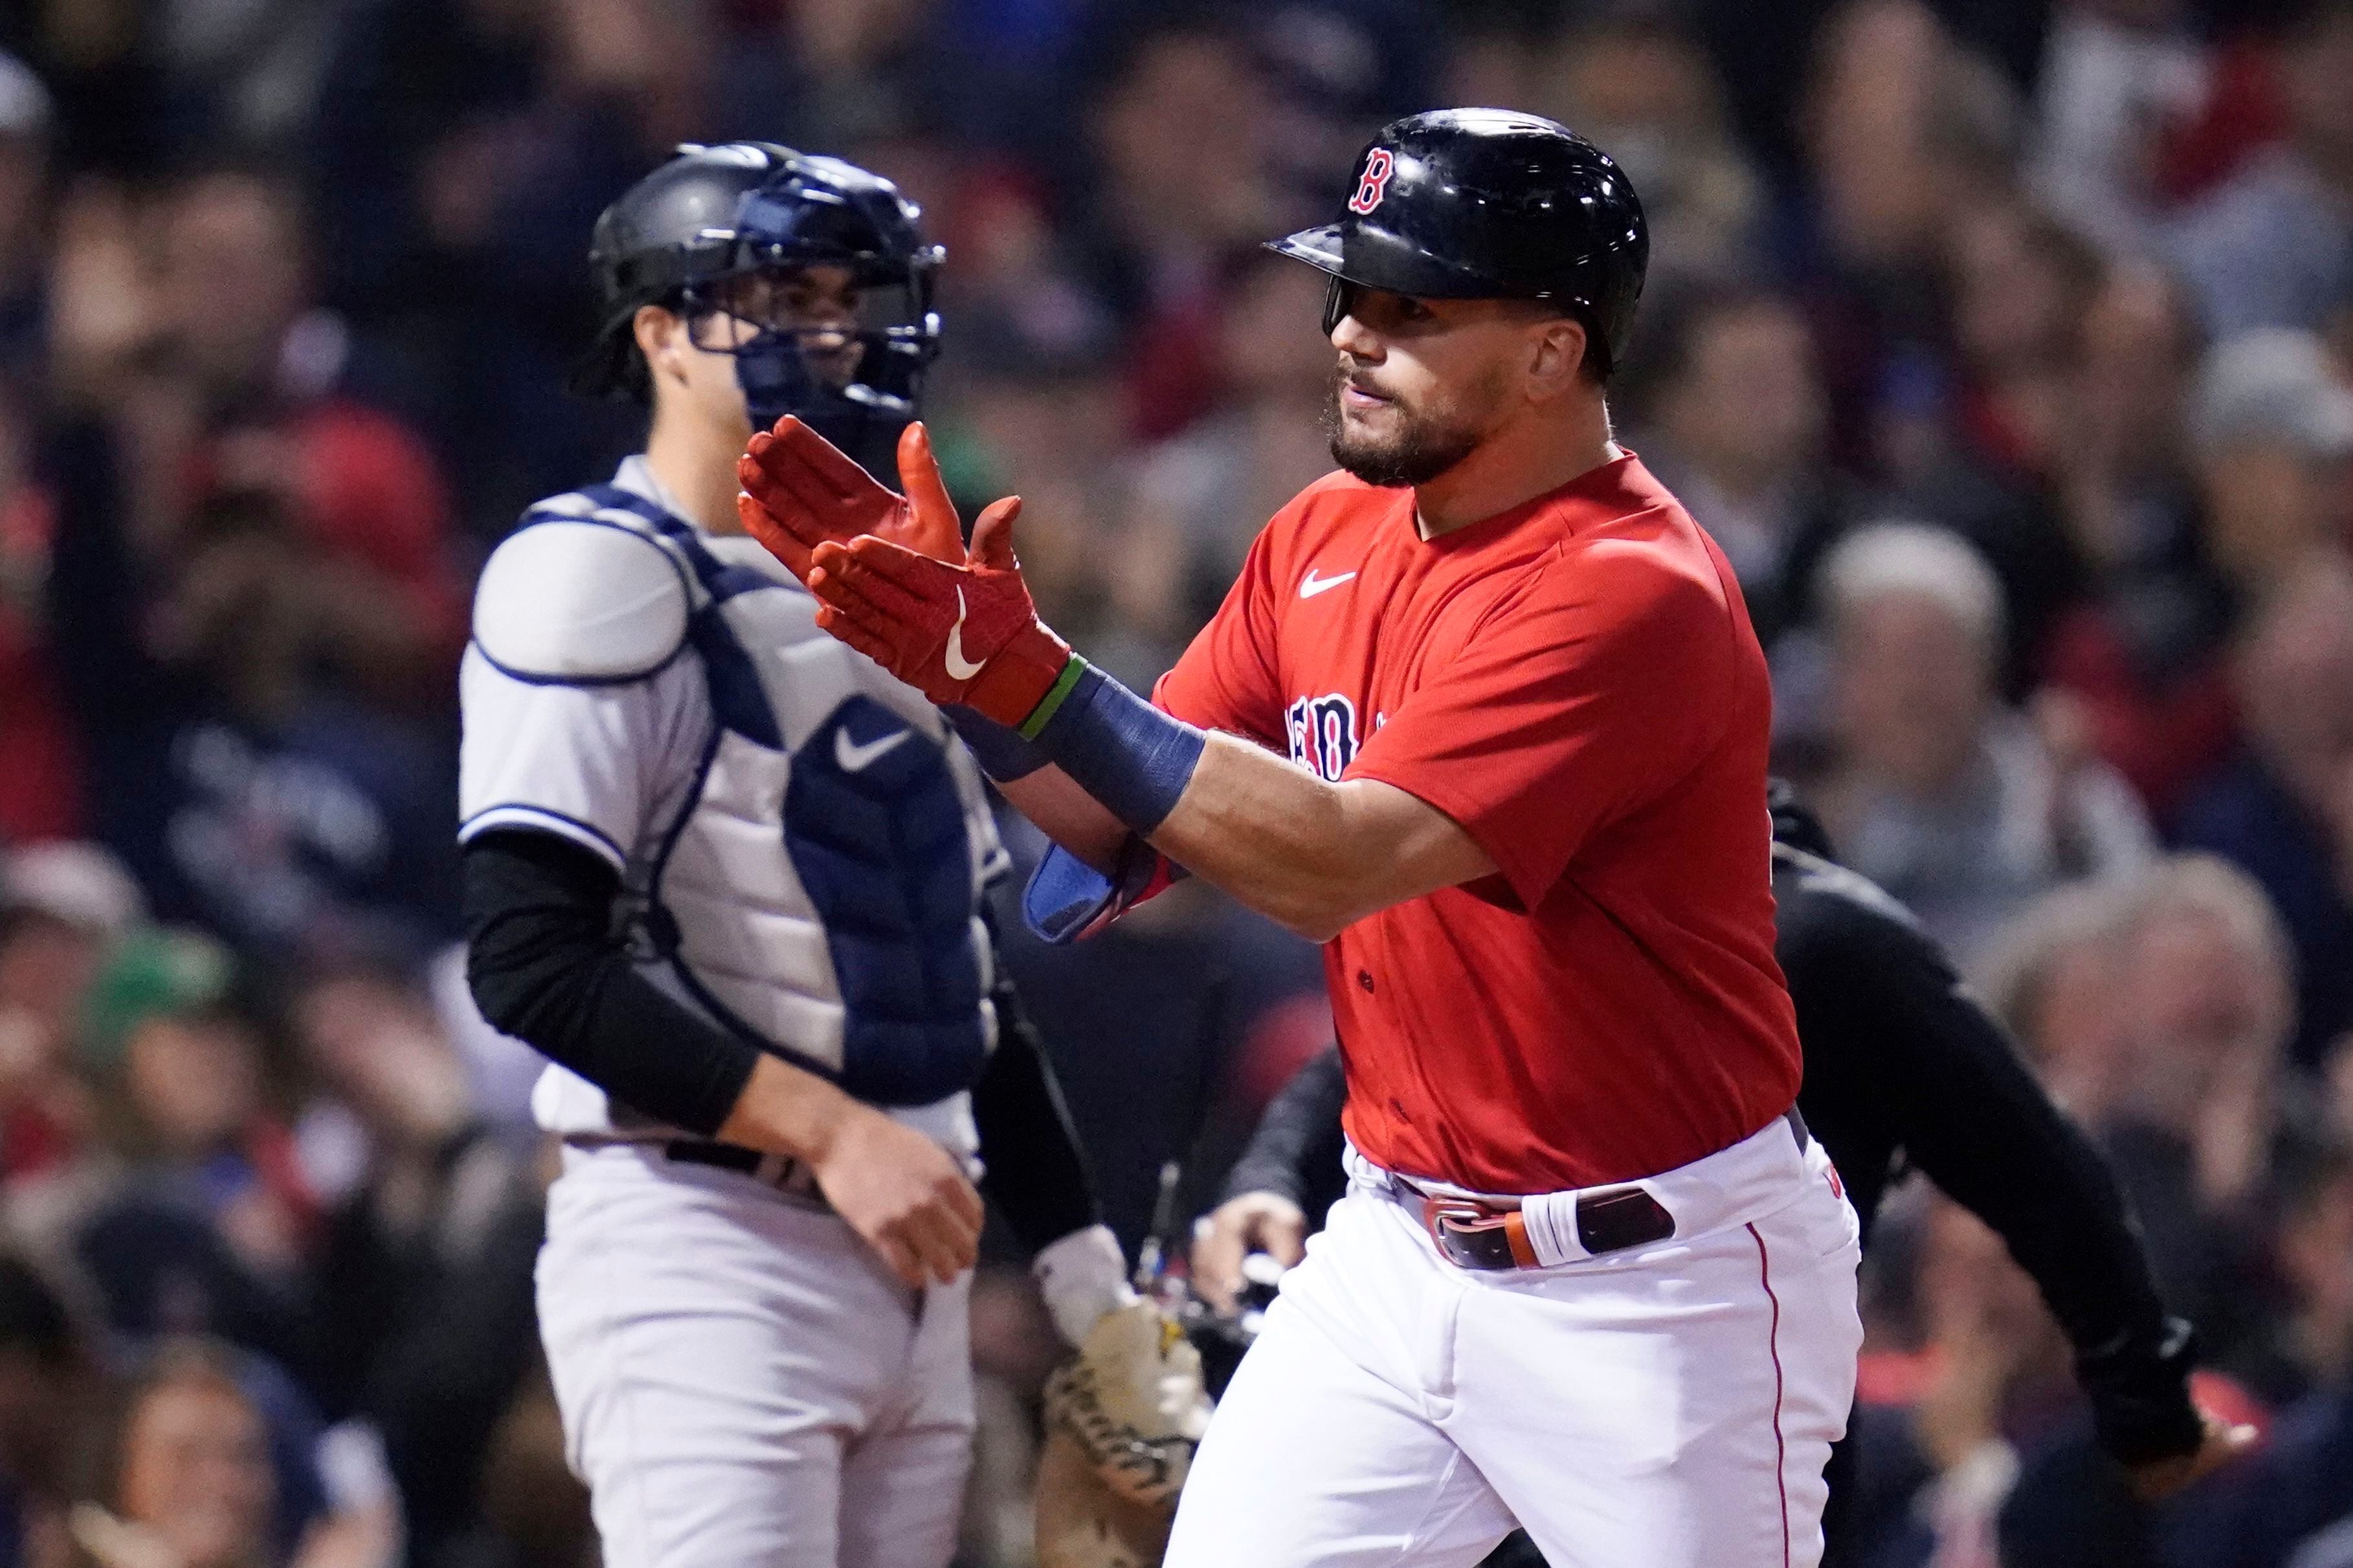 Shane Victorino says new Phillie Kyle Schwarber's power and